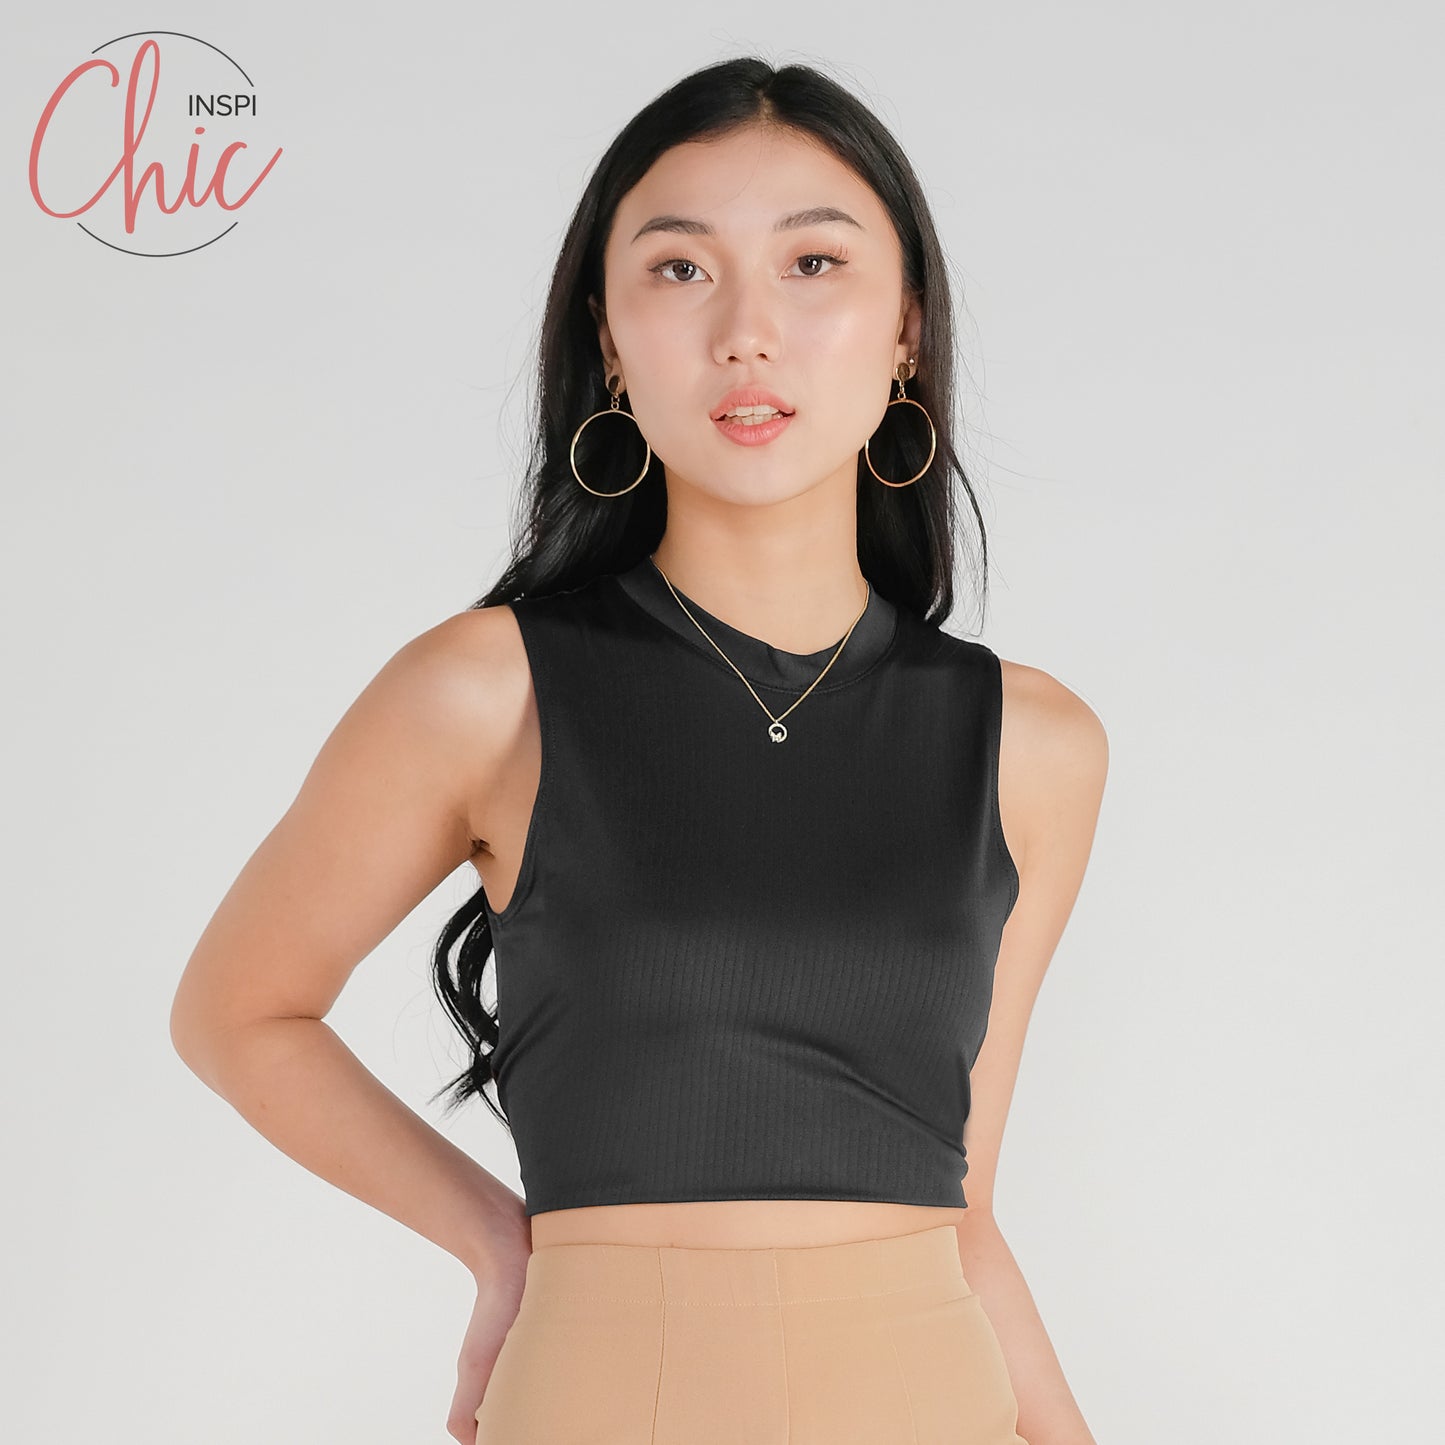 INSPI Chic Color Me Ribbed Close Neck Sleeveless Croptop Shirt for Women Sleeveless Top